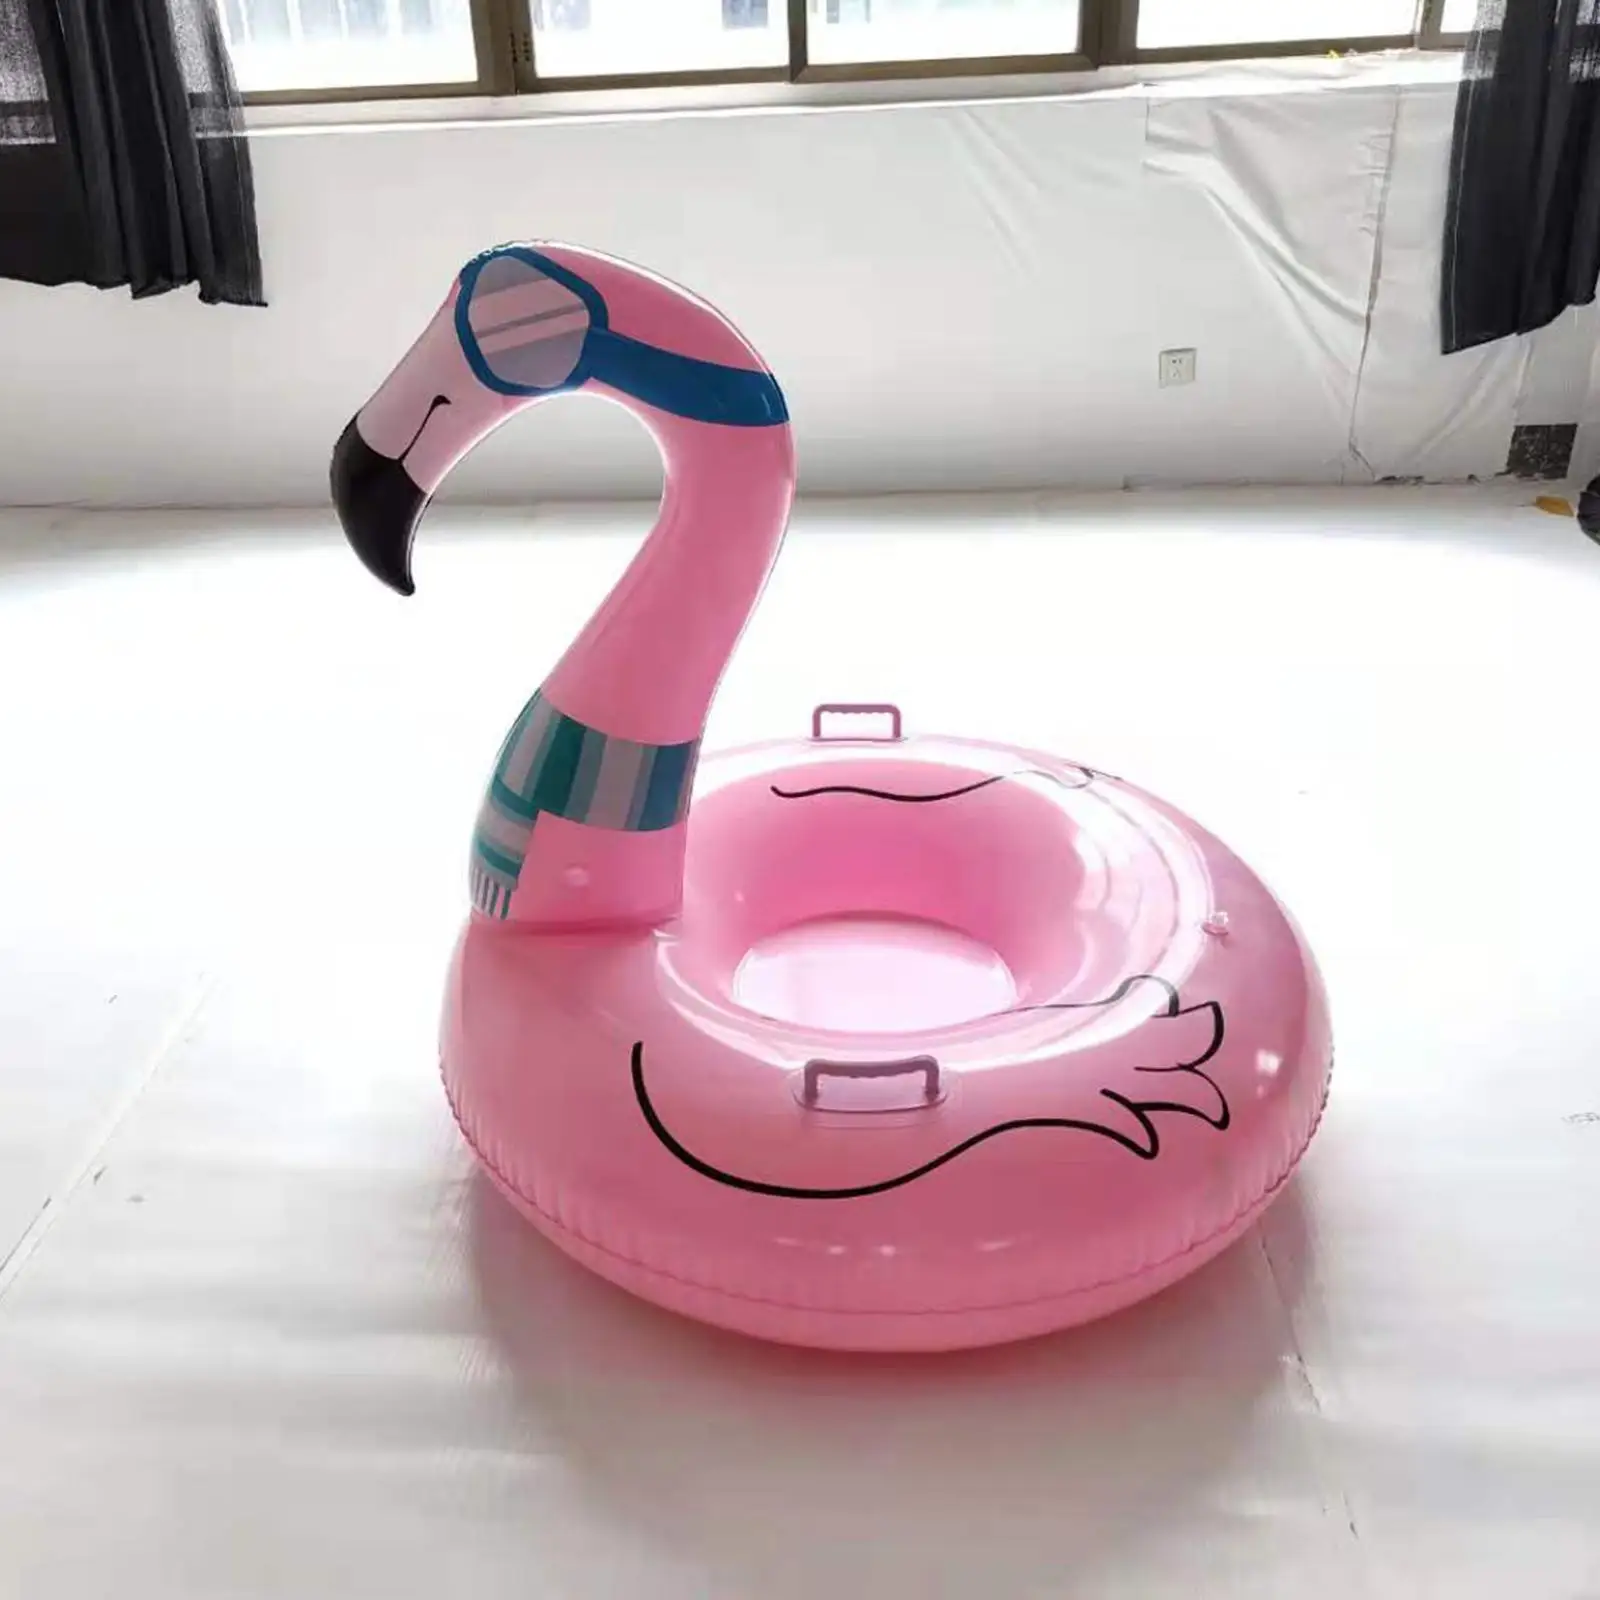 Inflatable Snow Tube for Children and Adults Flamingo Snow Tube 47`` Snow Sled for Games Family Activities Sledding Skiing